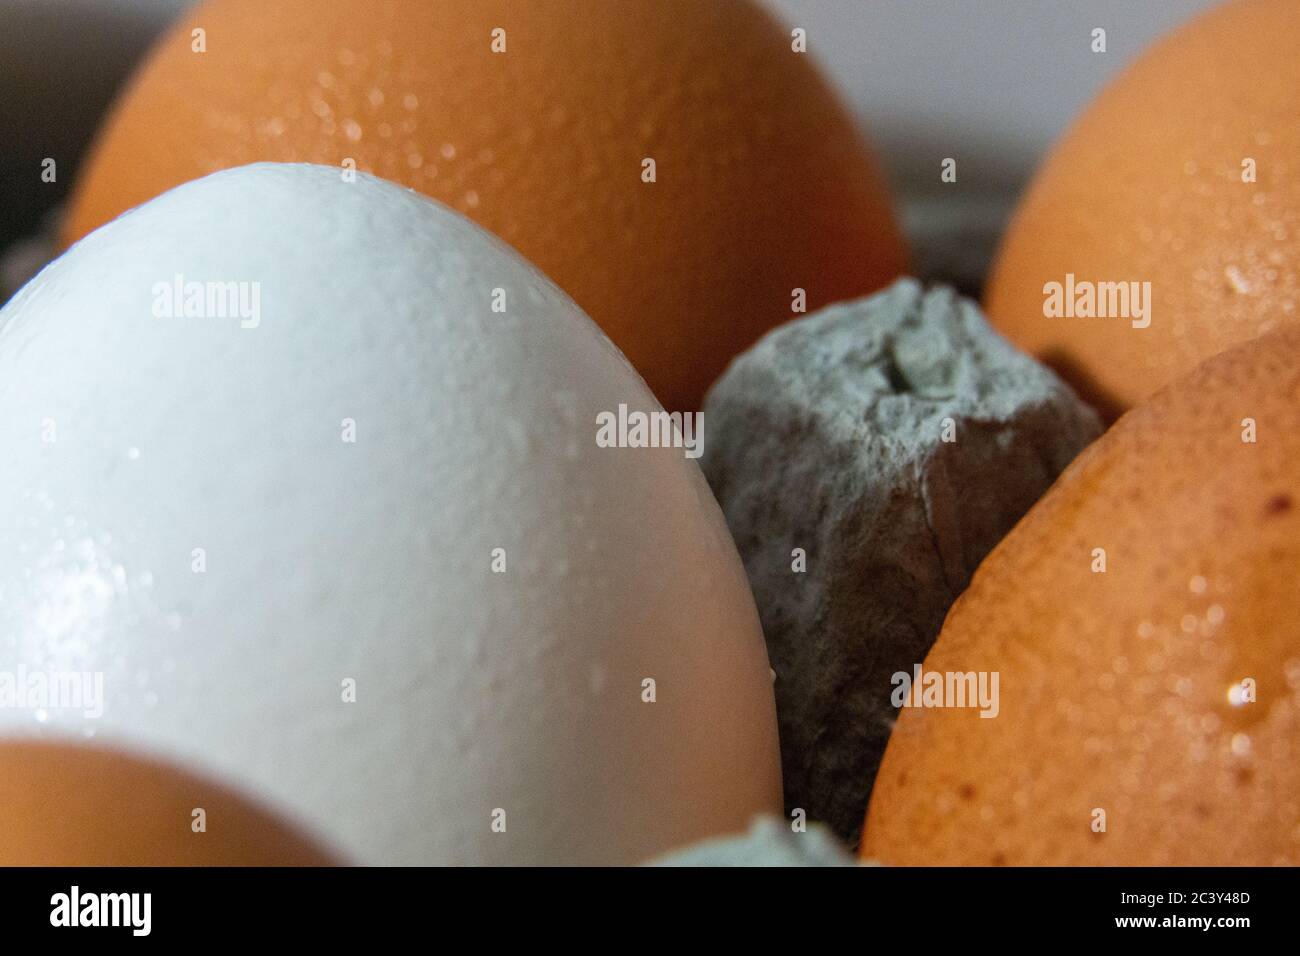 Close Up White Egg in the Middle of Brown Eggs Large in carton fresh wet eggs stock photograph Stock Photo